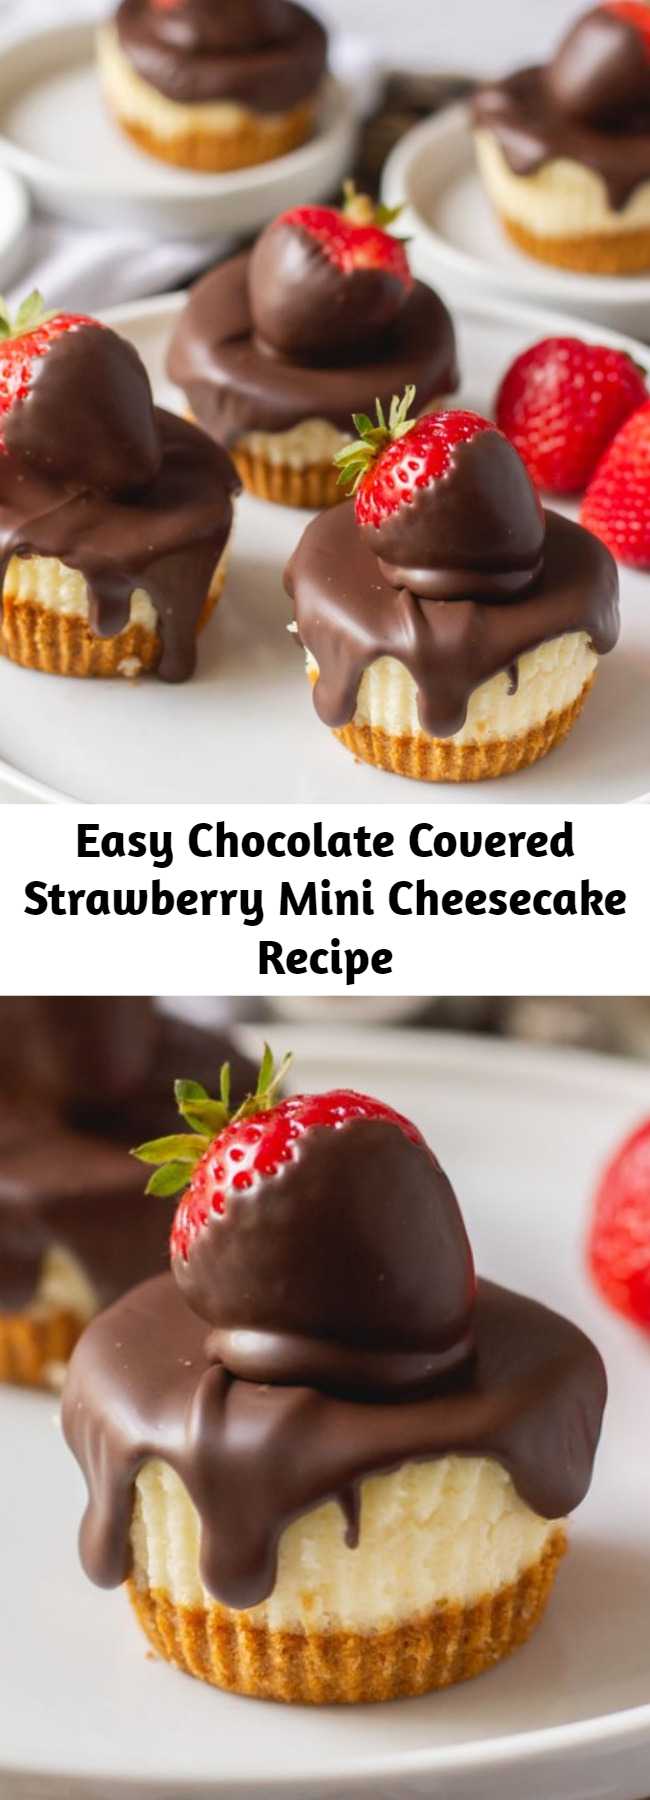 Easy Chocolate Covered Strawberry Mini Cheesecake Recipe - The best way to serve these classic mini cheesecakes is with chocolate covered strawberries on top! Check out this recipe for light and airy mini cheesecakes with a graham cracker crust – they’re a delightful twist on the typical dense and creamy cheesecake!